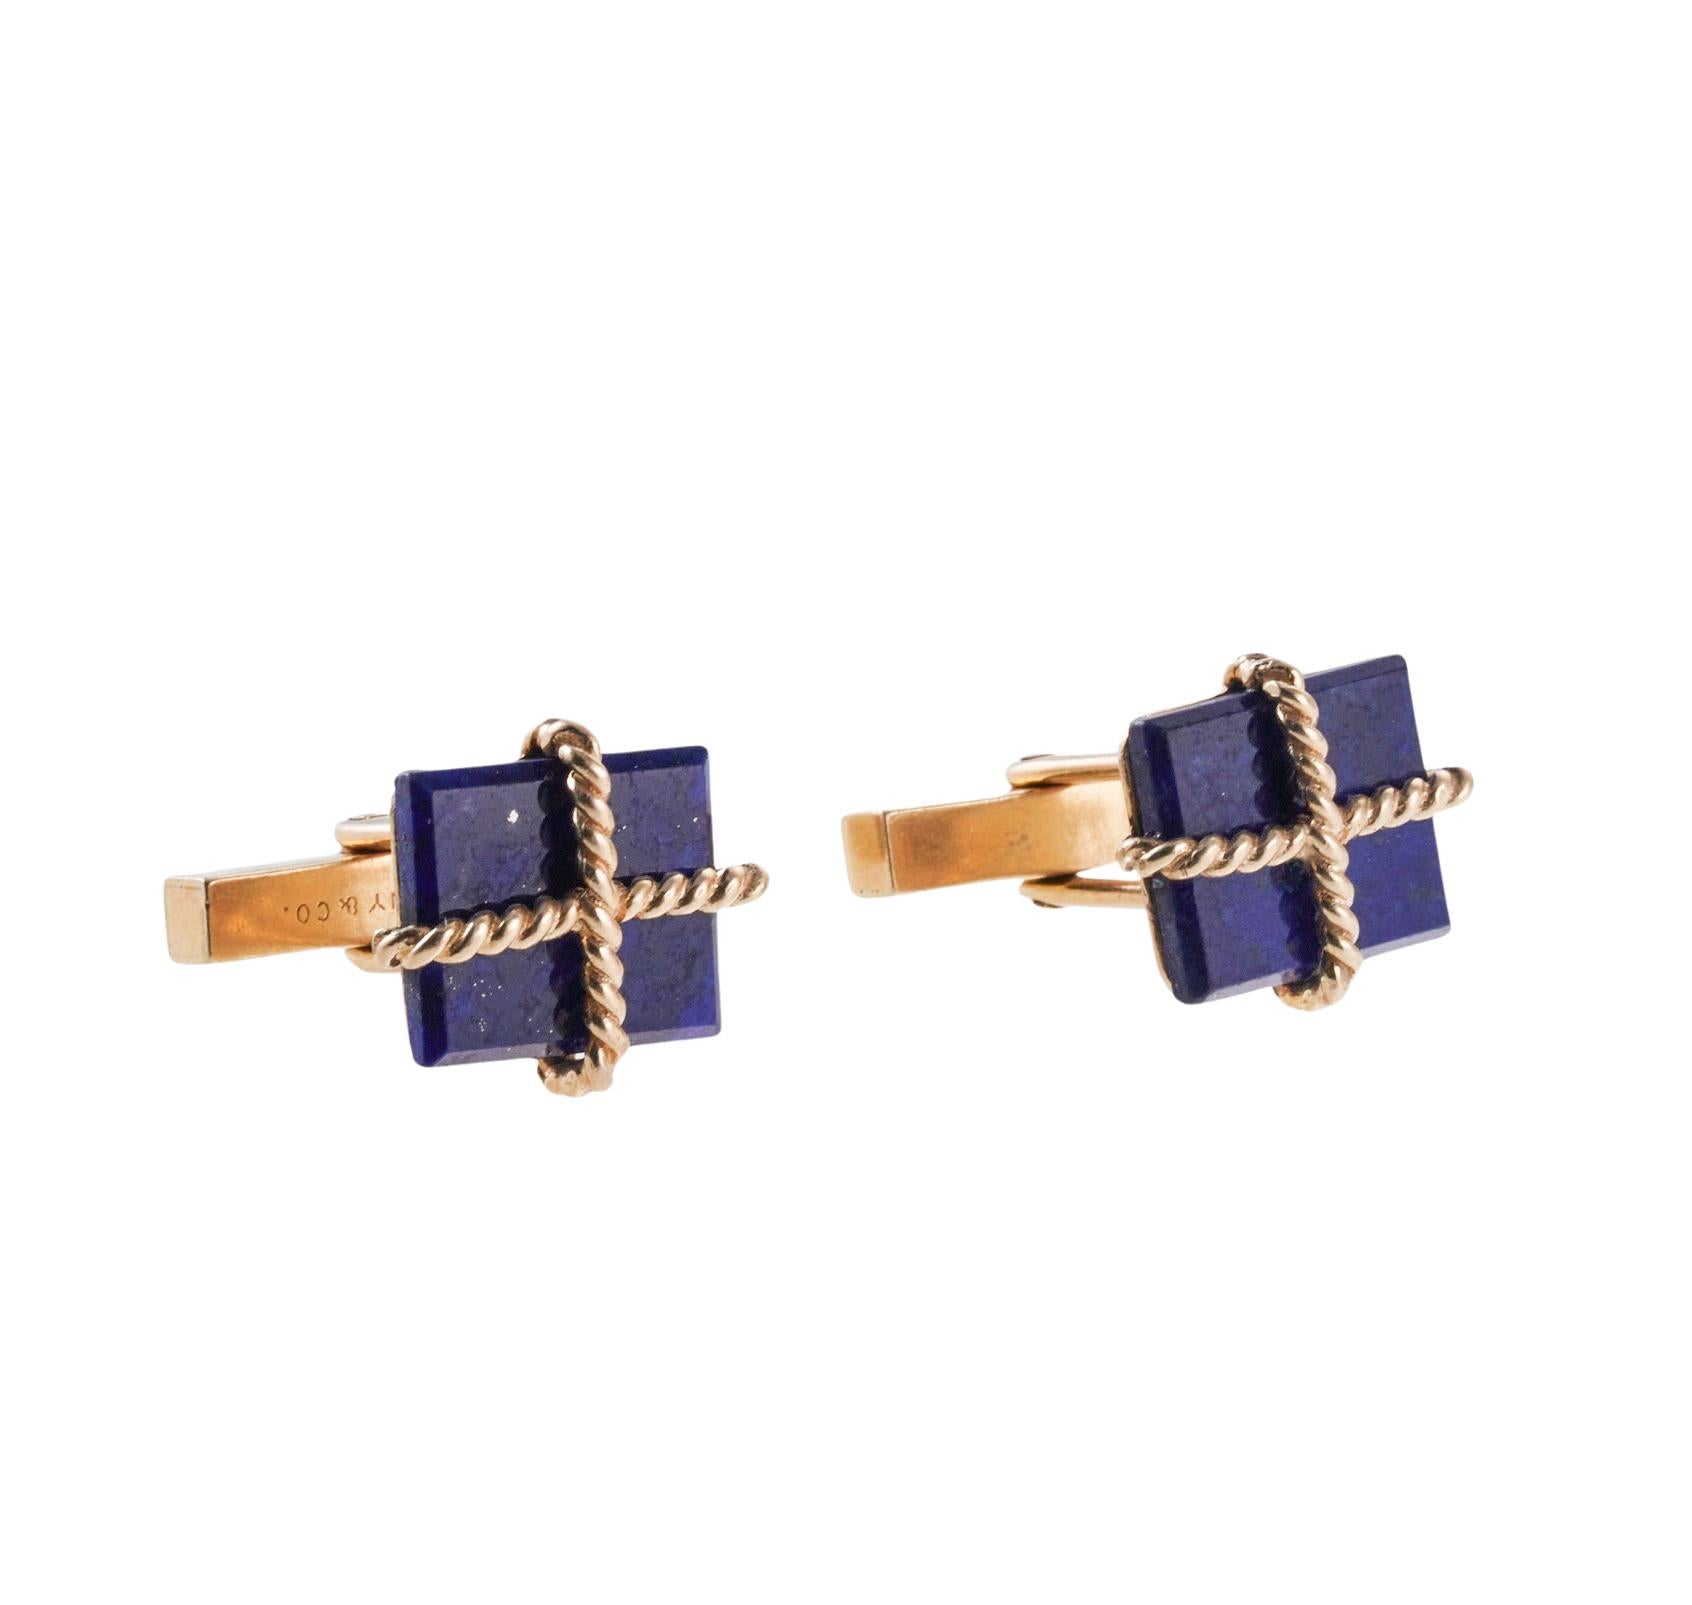 Pair of Midcentury 14k yellow gold Tiffany & Co cufflinks, with lapis lazuli. Each cufflink top measures 17mm x 15mm. Hallmarked Tiffany & Co on the back, engraving on the back side of the top 